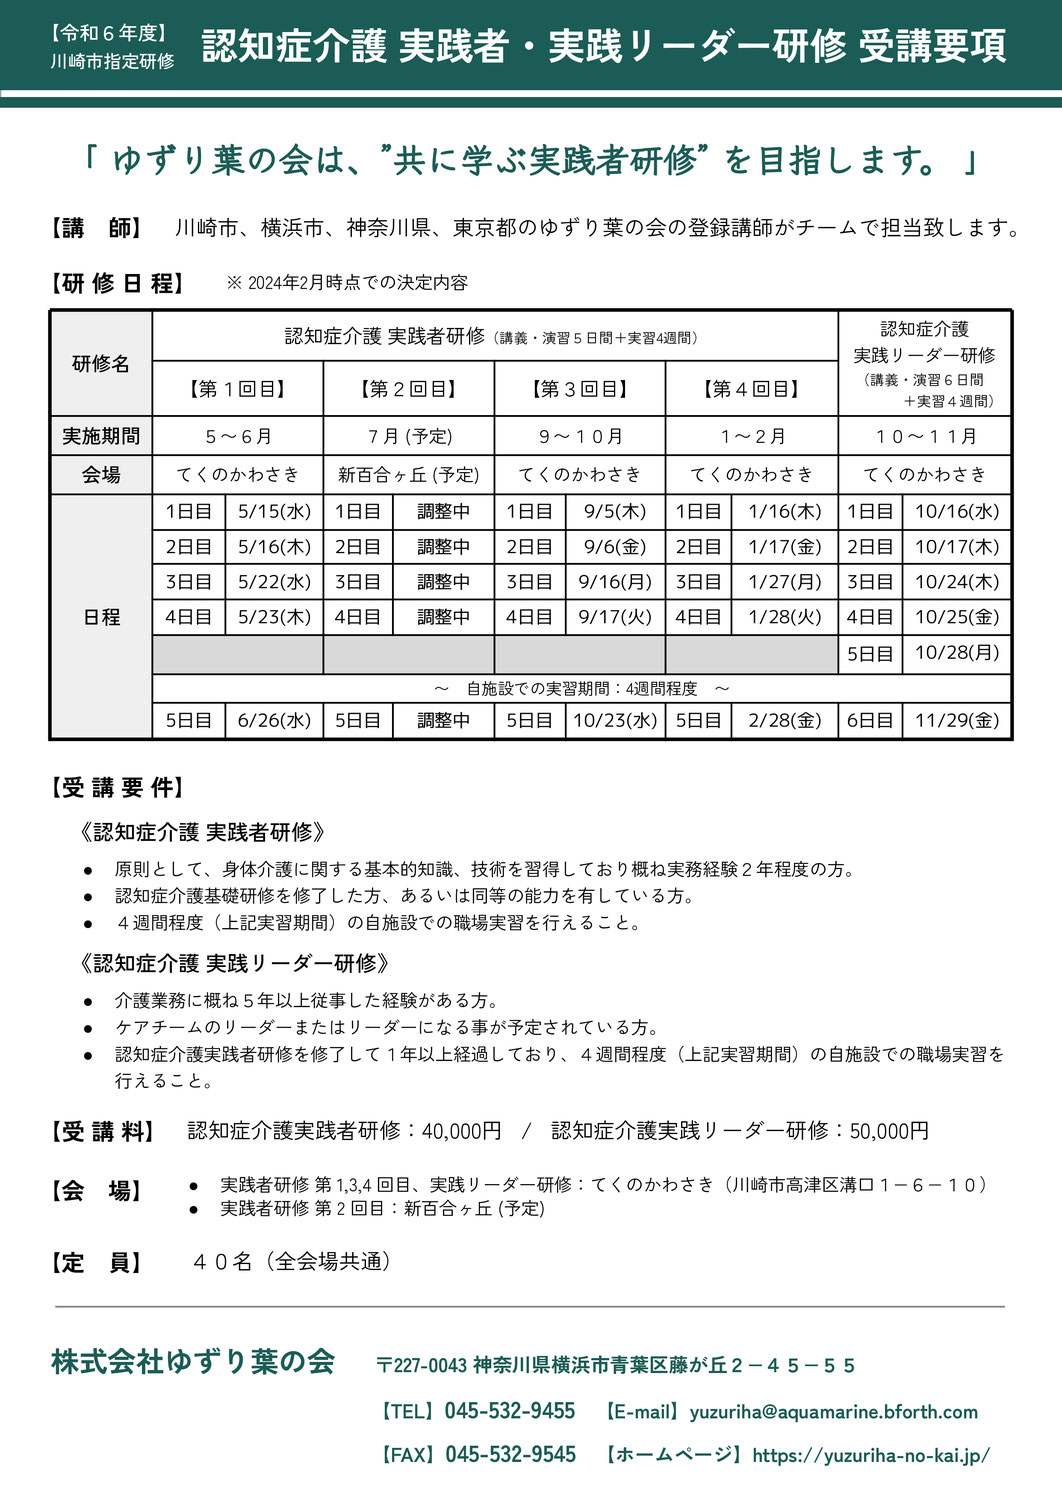 NEW >【令和6年度】川崎市指定 認知症介護実践者研修のご案内  (受講要項・申込書公開のお知らせ)